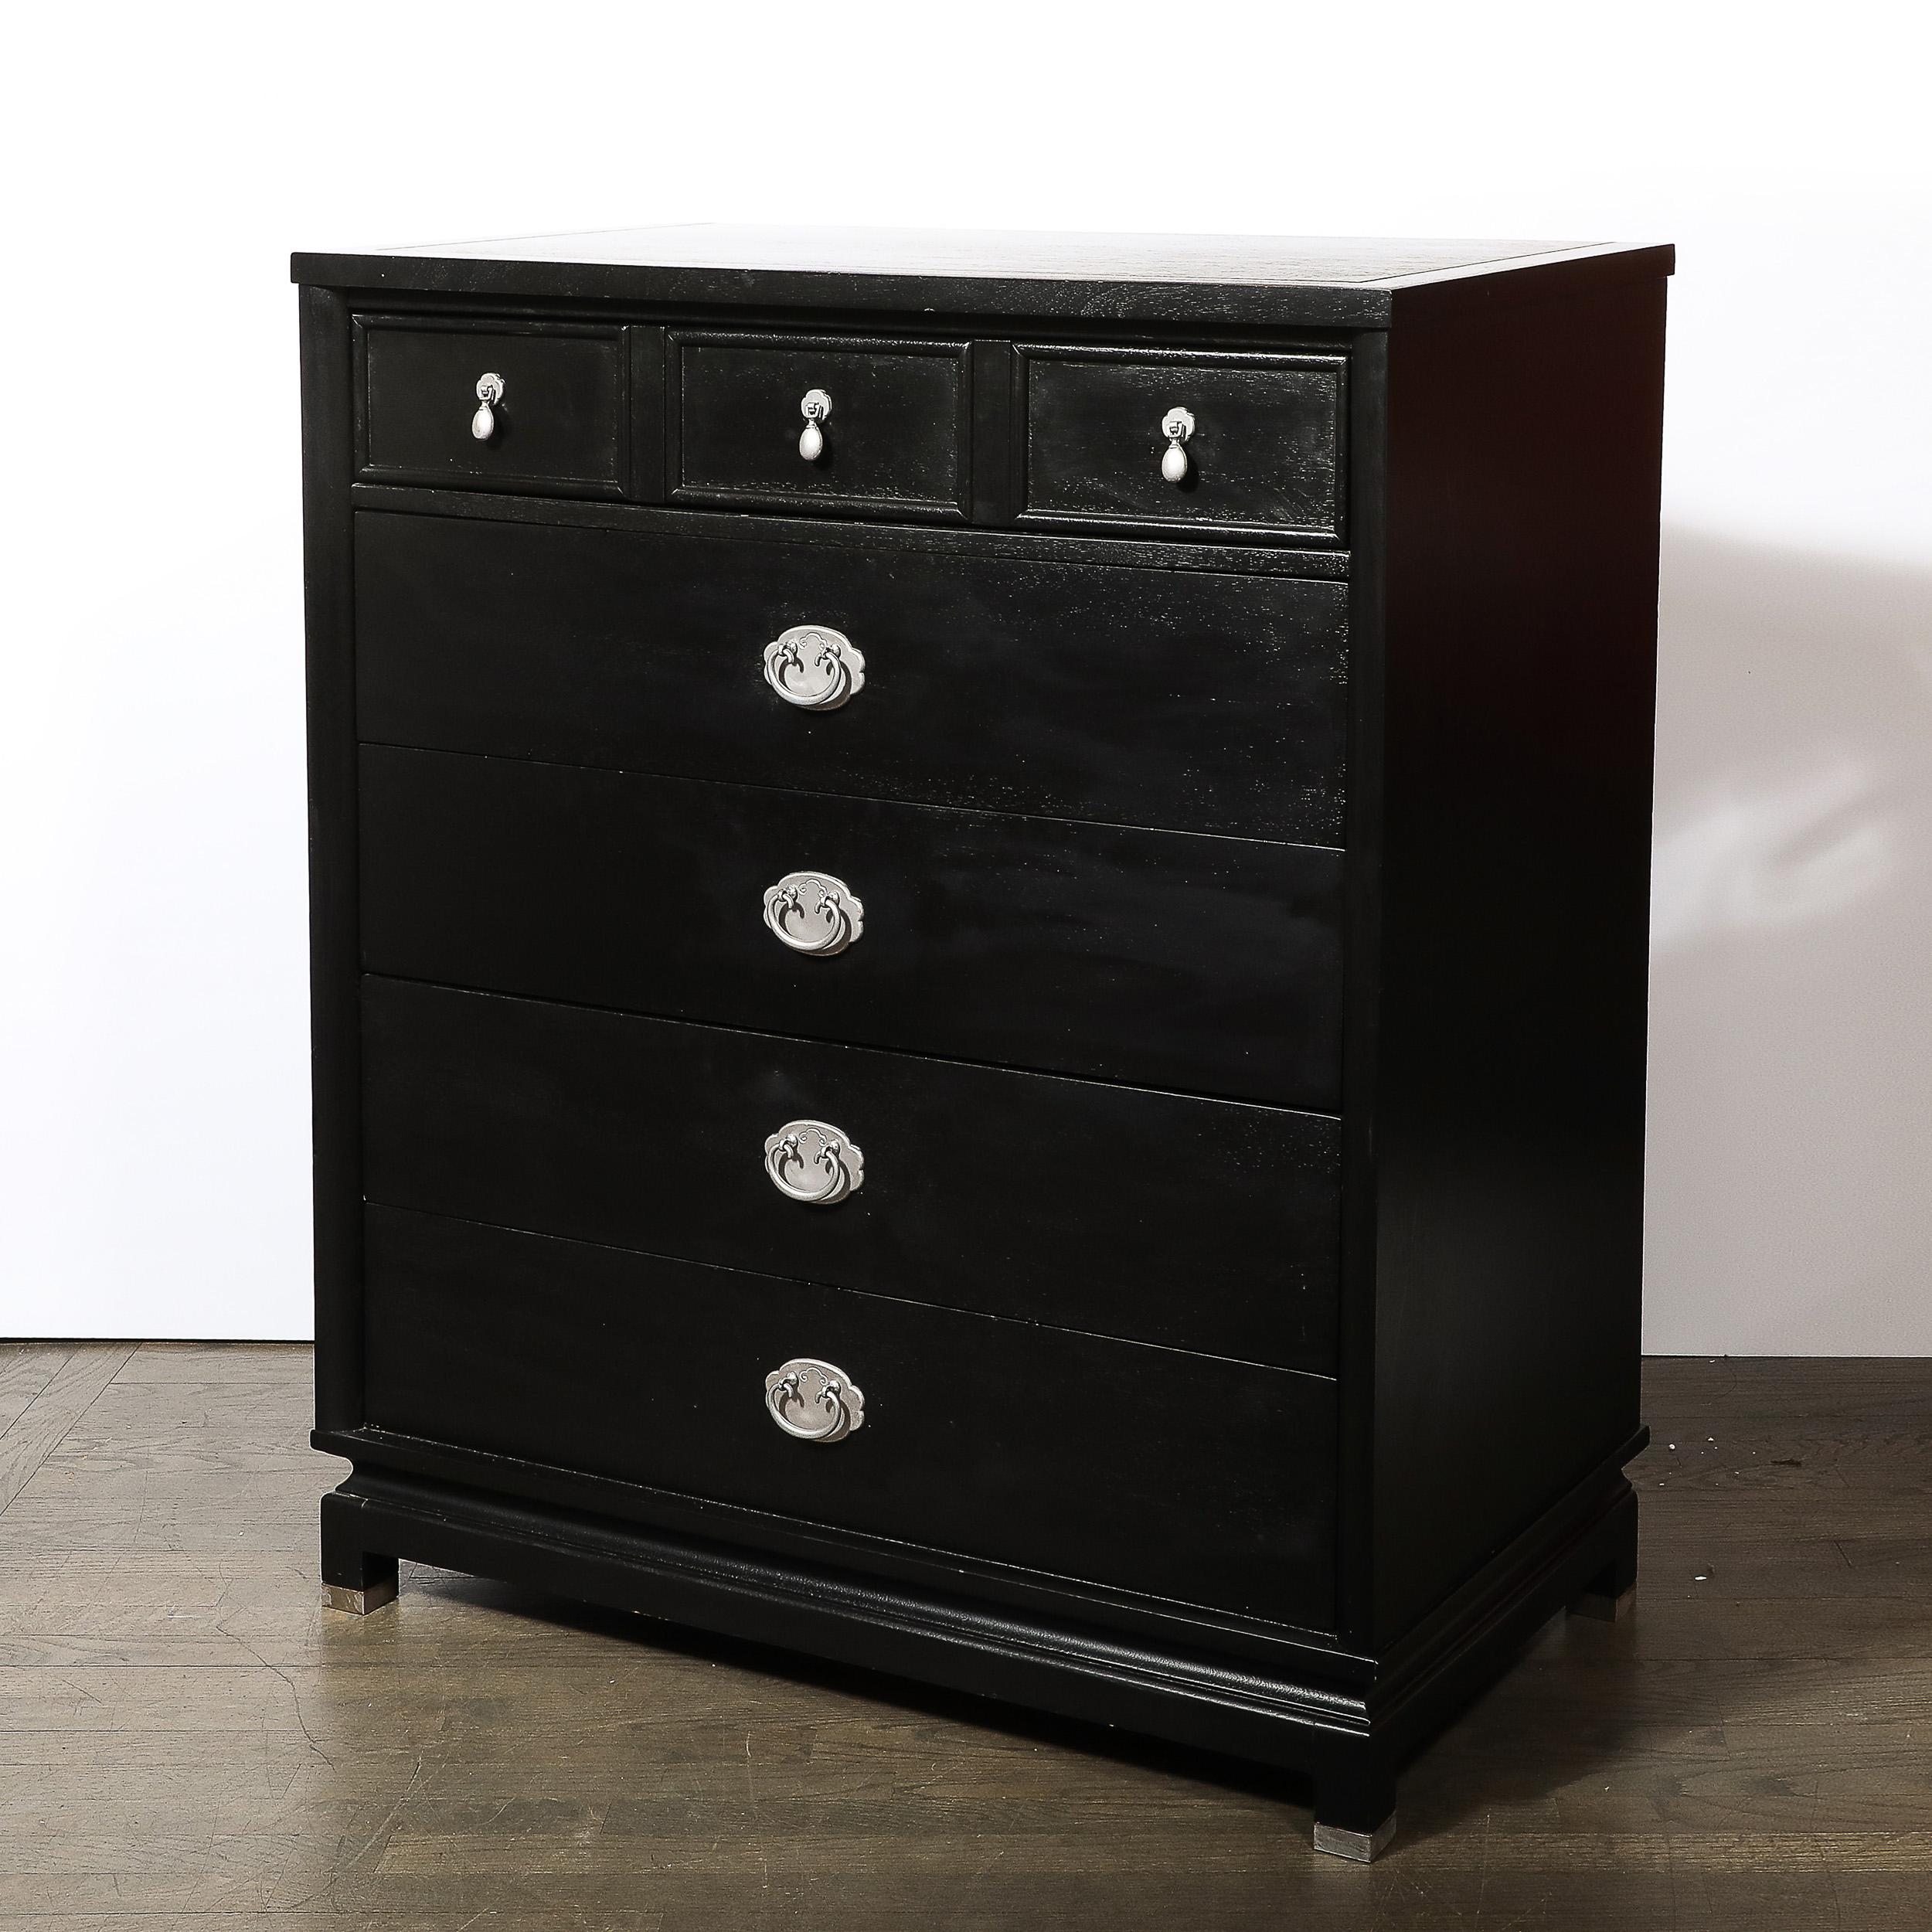 This substantial and reserved Mid-Century Modernist Chest of Drawers in Ebonized Walnut and Antique Nickel Hardware originates from the United States, Circa 1960. Features a plinth base with sabot detailing and beautifully subtle bevels and grooved